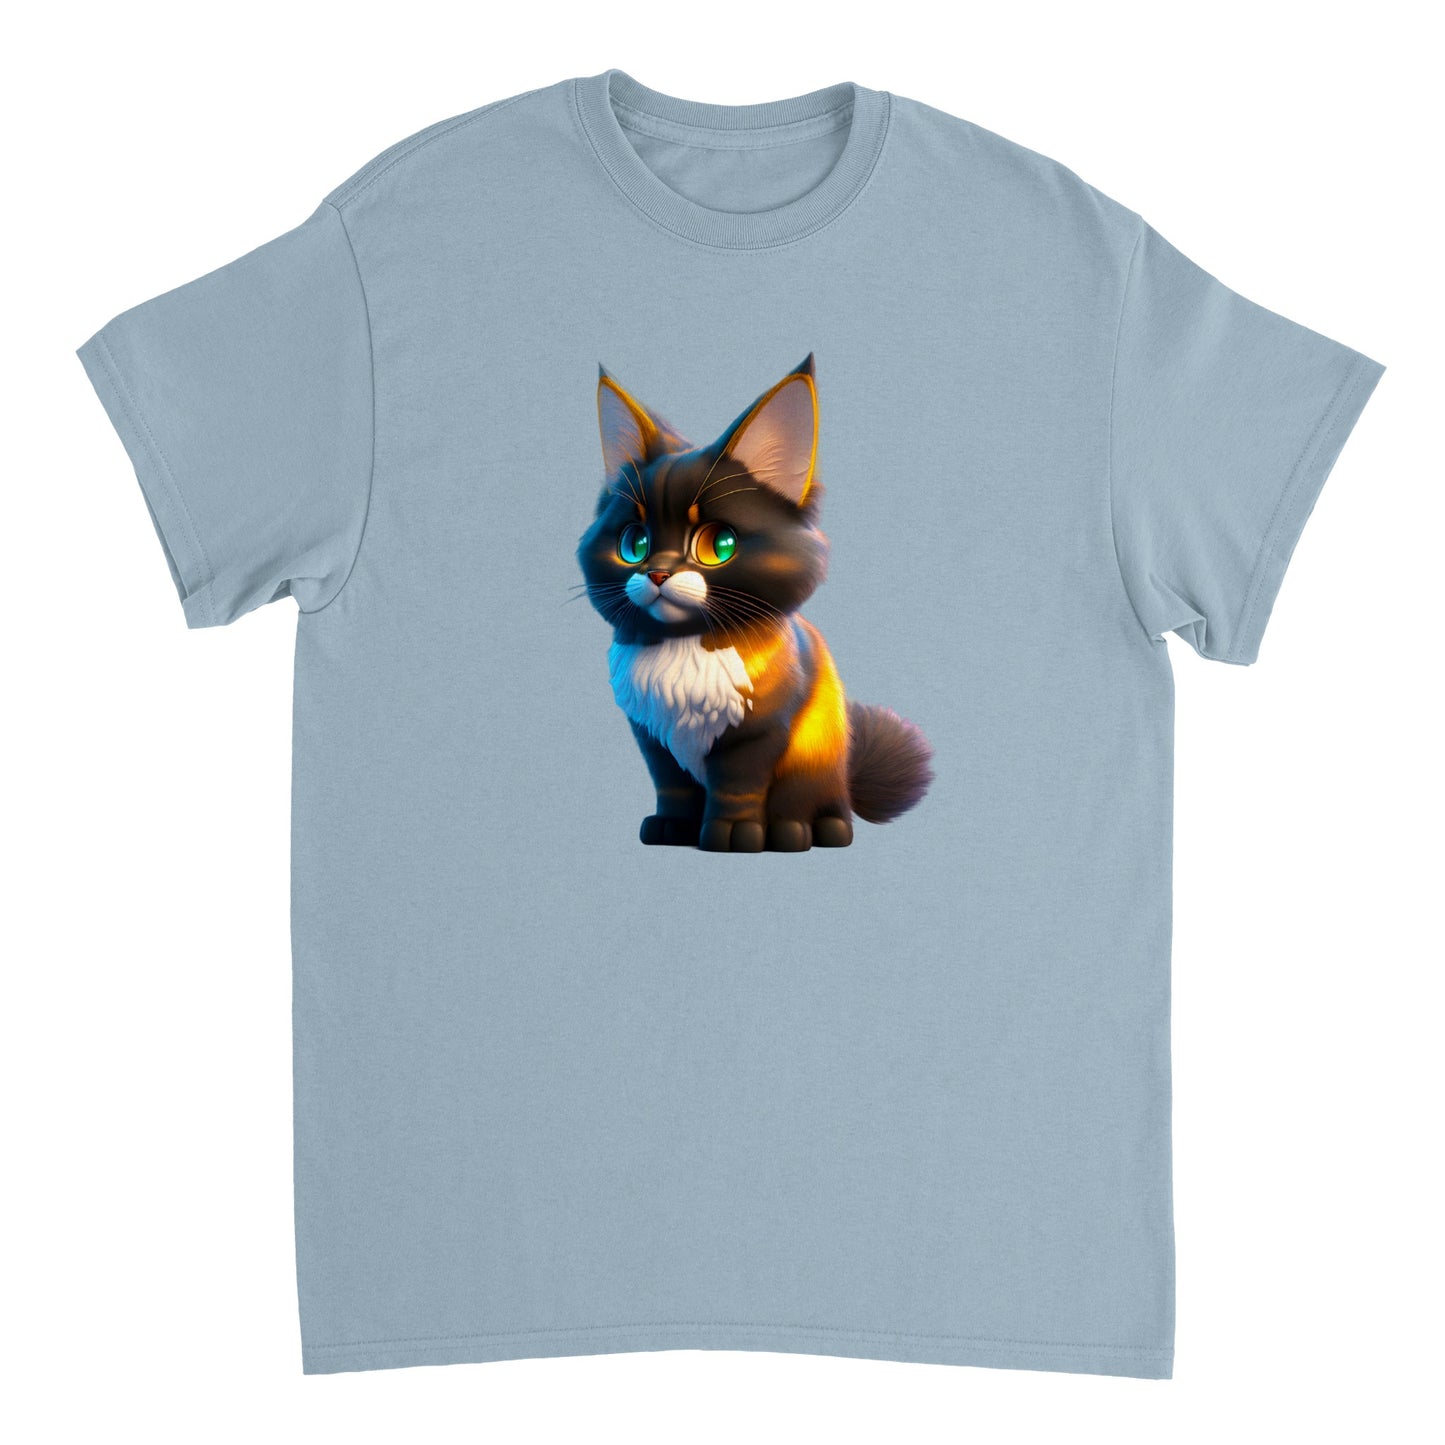 Adorable, Cool, Cute Cats and Kittens Toy - Heavyweight Unisex Crewneck T-shirt 3